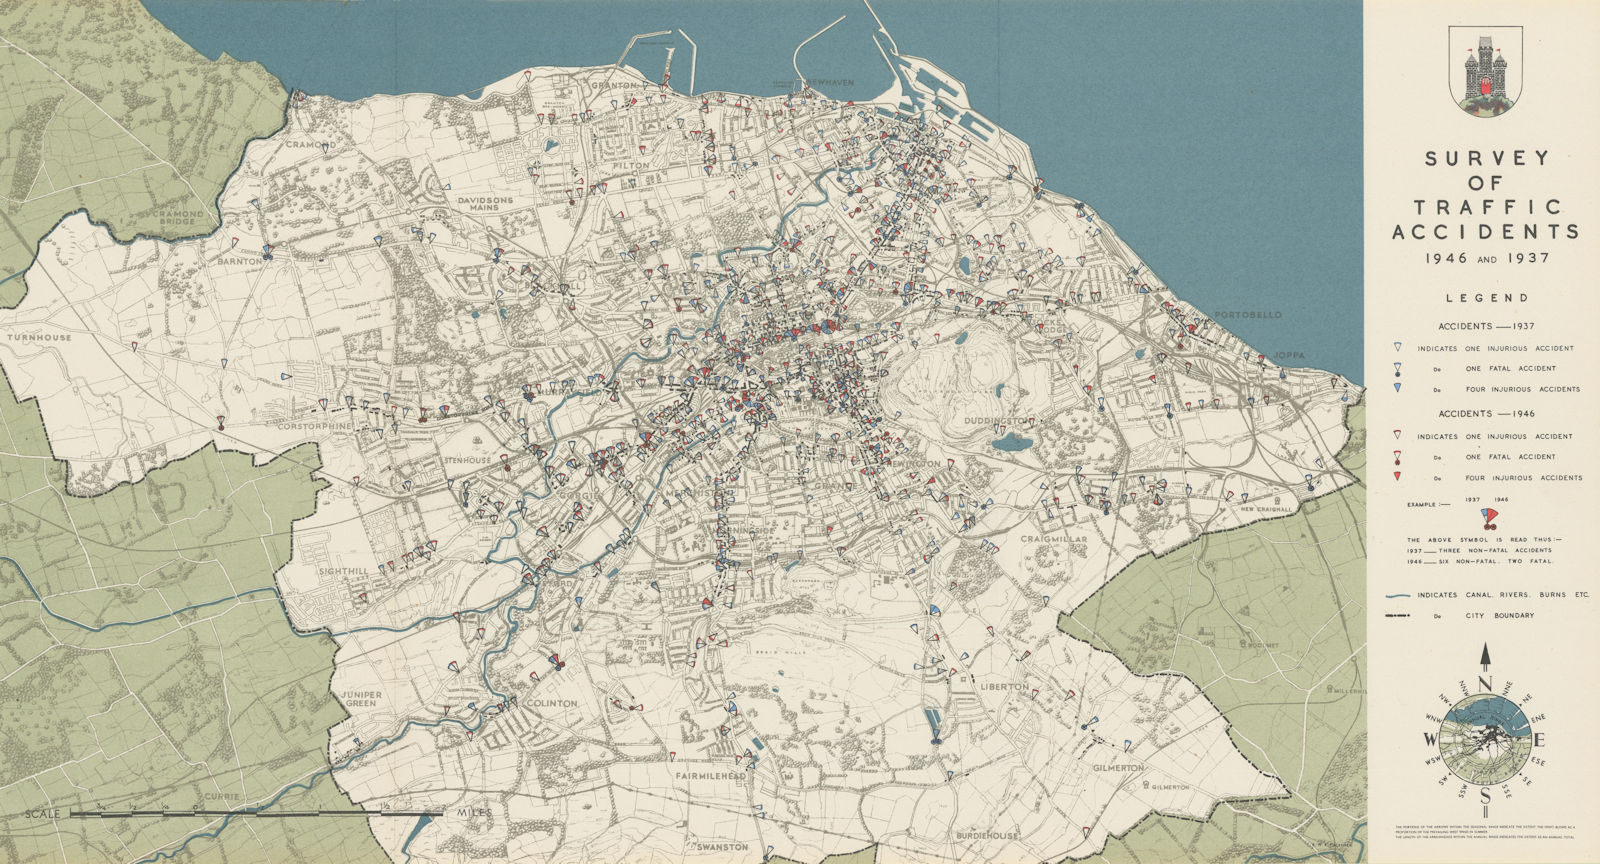 EDINBURGH. Survey of Road Traffic Accidents 1946 and 1937. ABERCROMBIE 1949 map